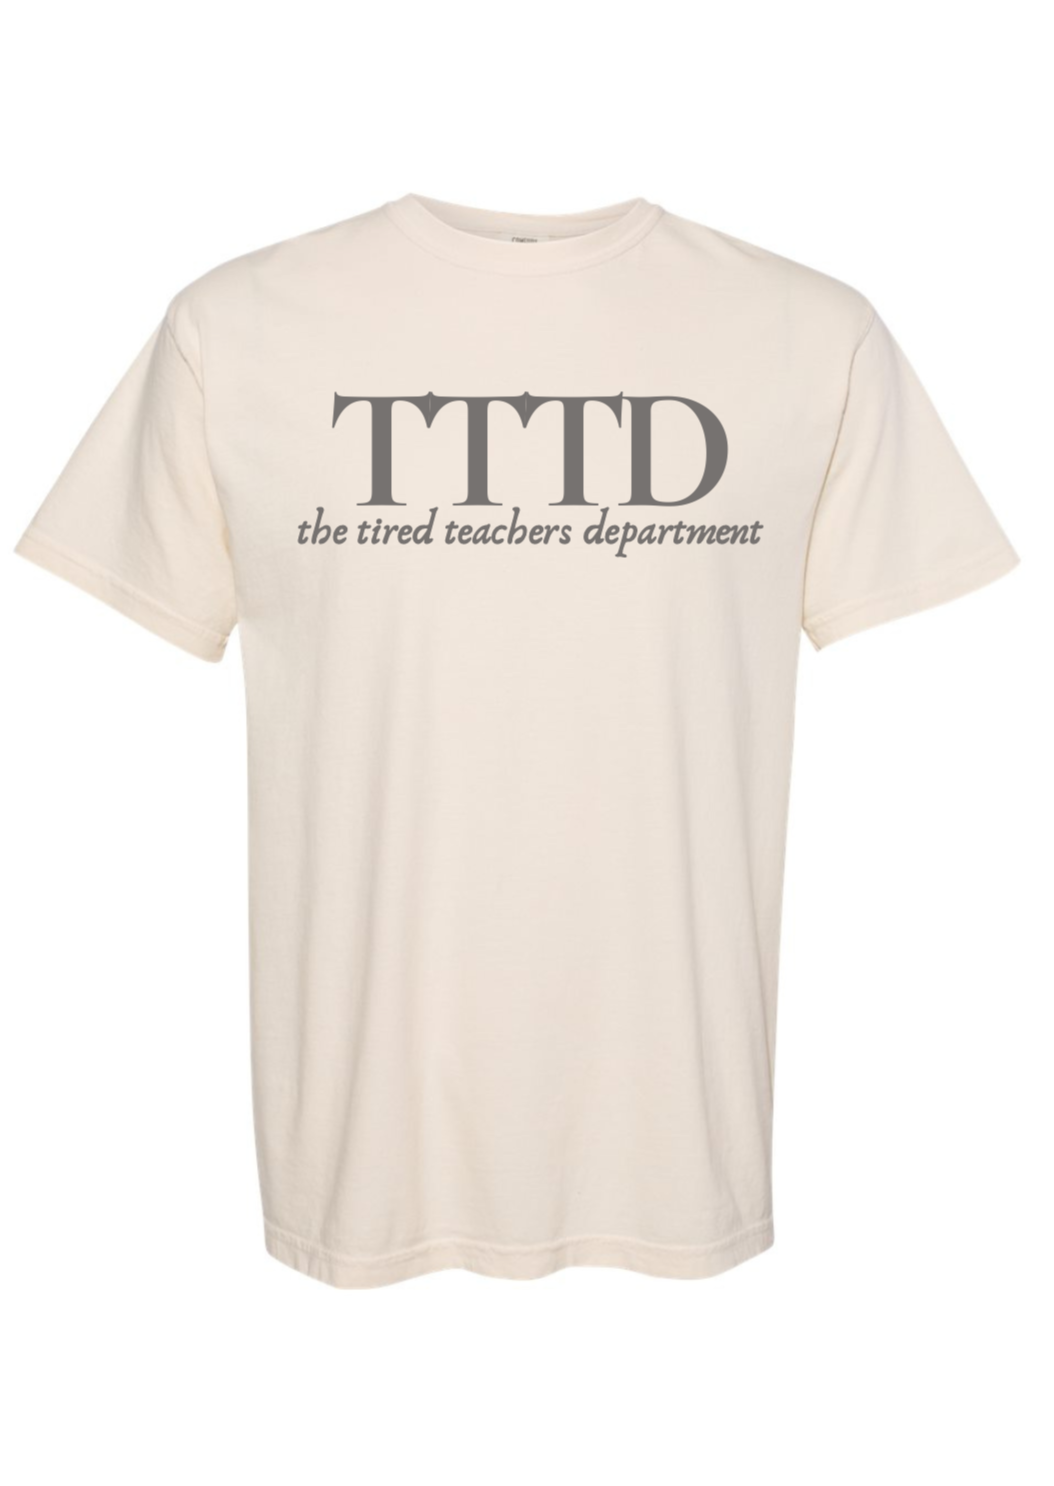 the tired teachers department t-shirt (smile)